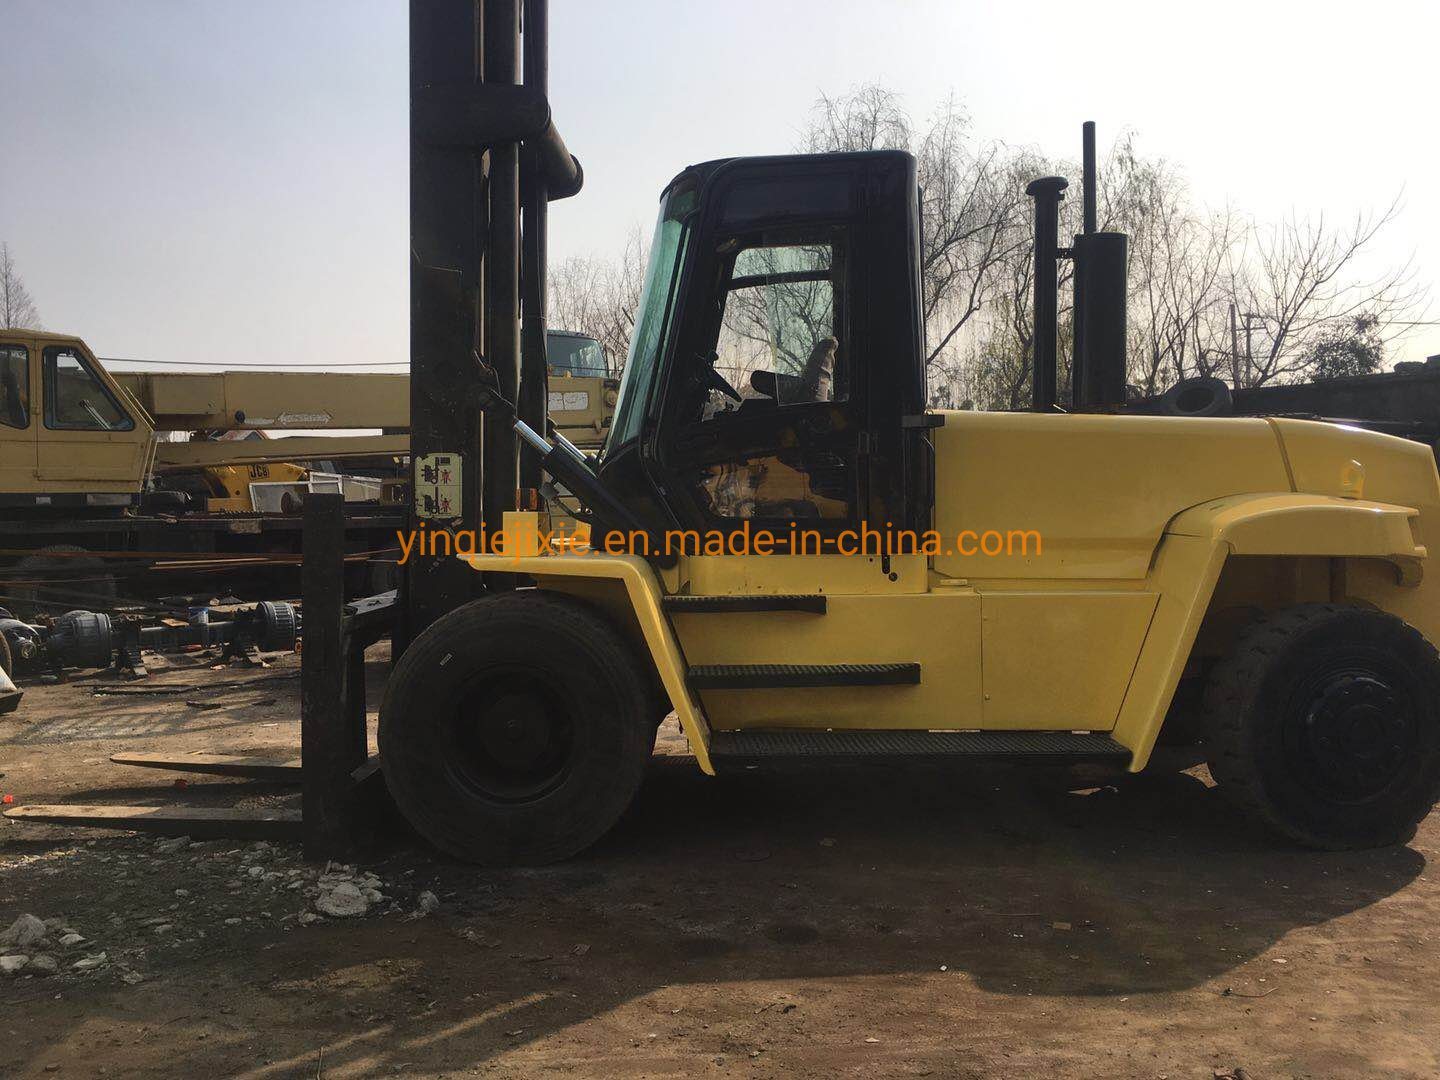 Used Hyster 16t Forklift, USA Made Forklift, Hyster Forklift, 16t Forklift, Used Forklift